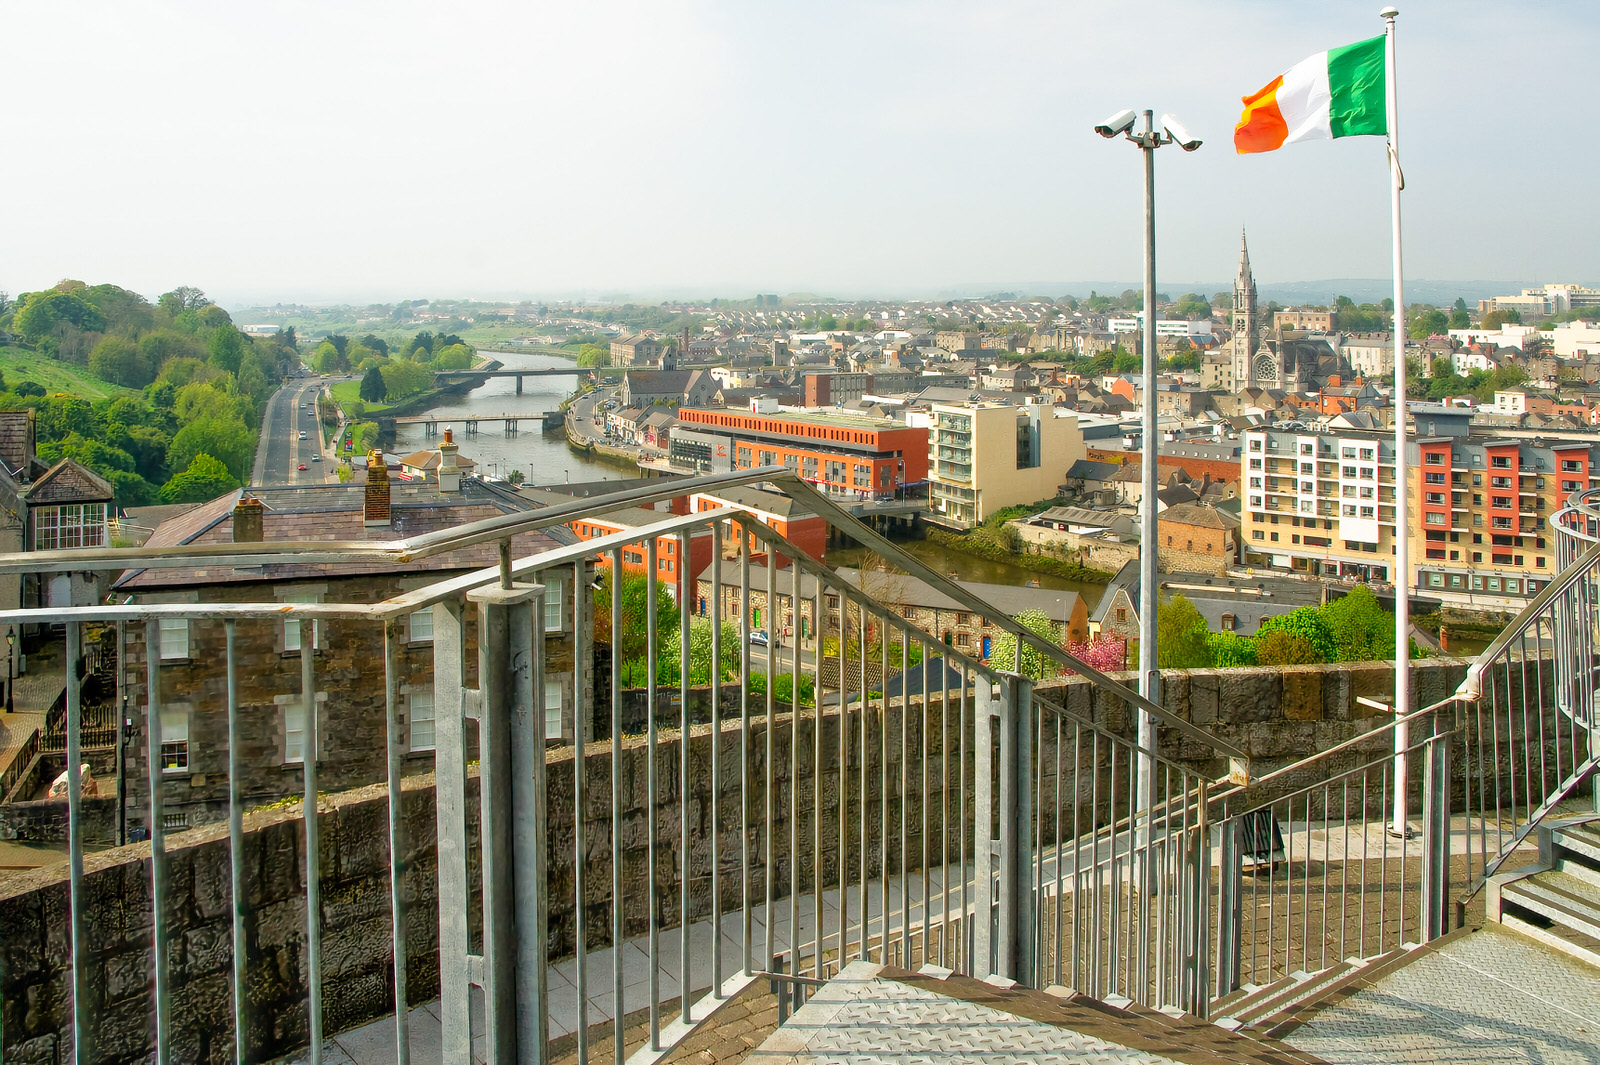 PANORAMIC VIEWS OF DROGHEDA AS IT WAS WAS IN 2011 [PRODUCED USING SONY NEX-5 PANORAMA MODE] 014